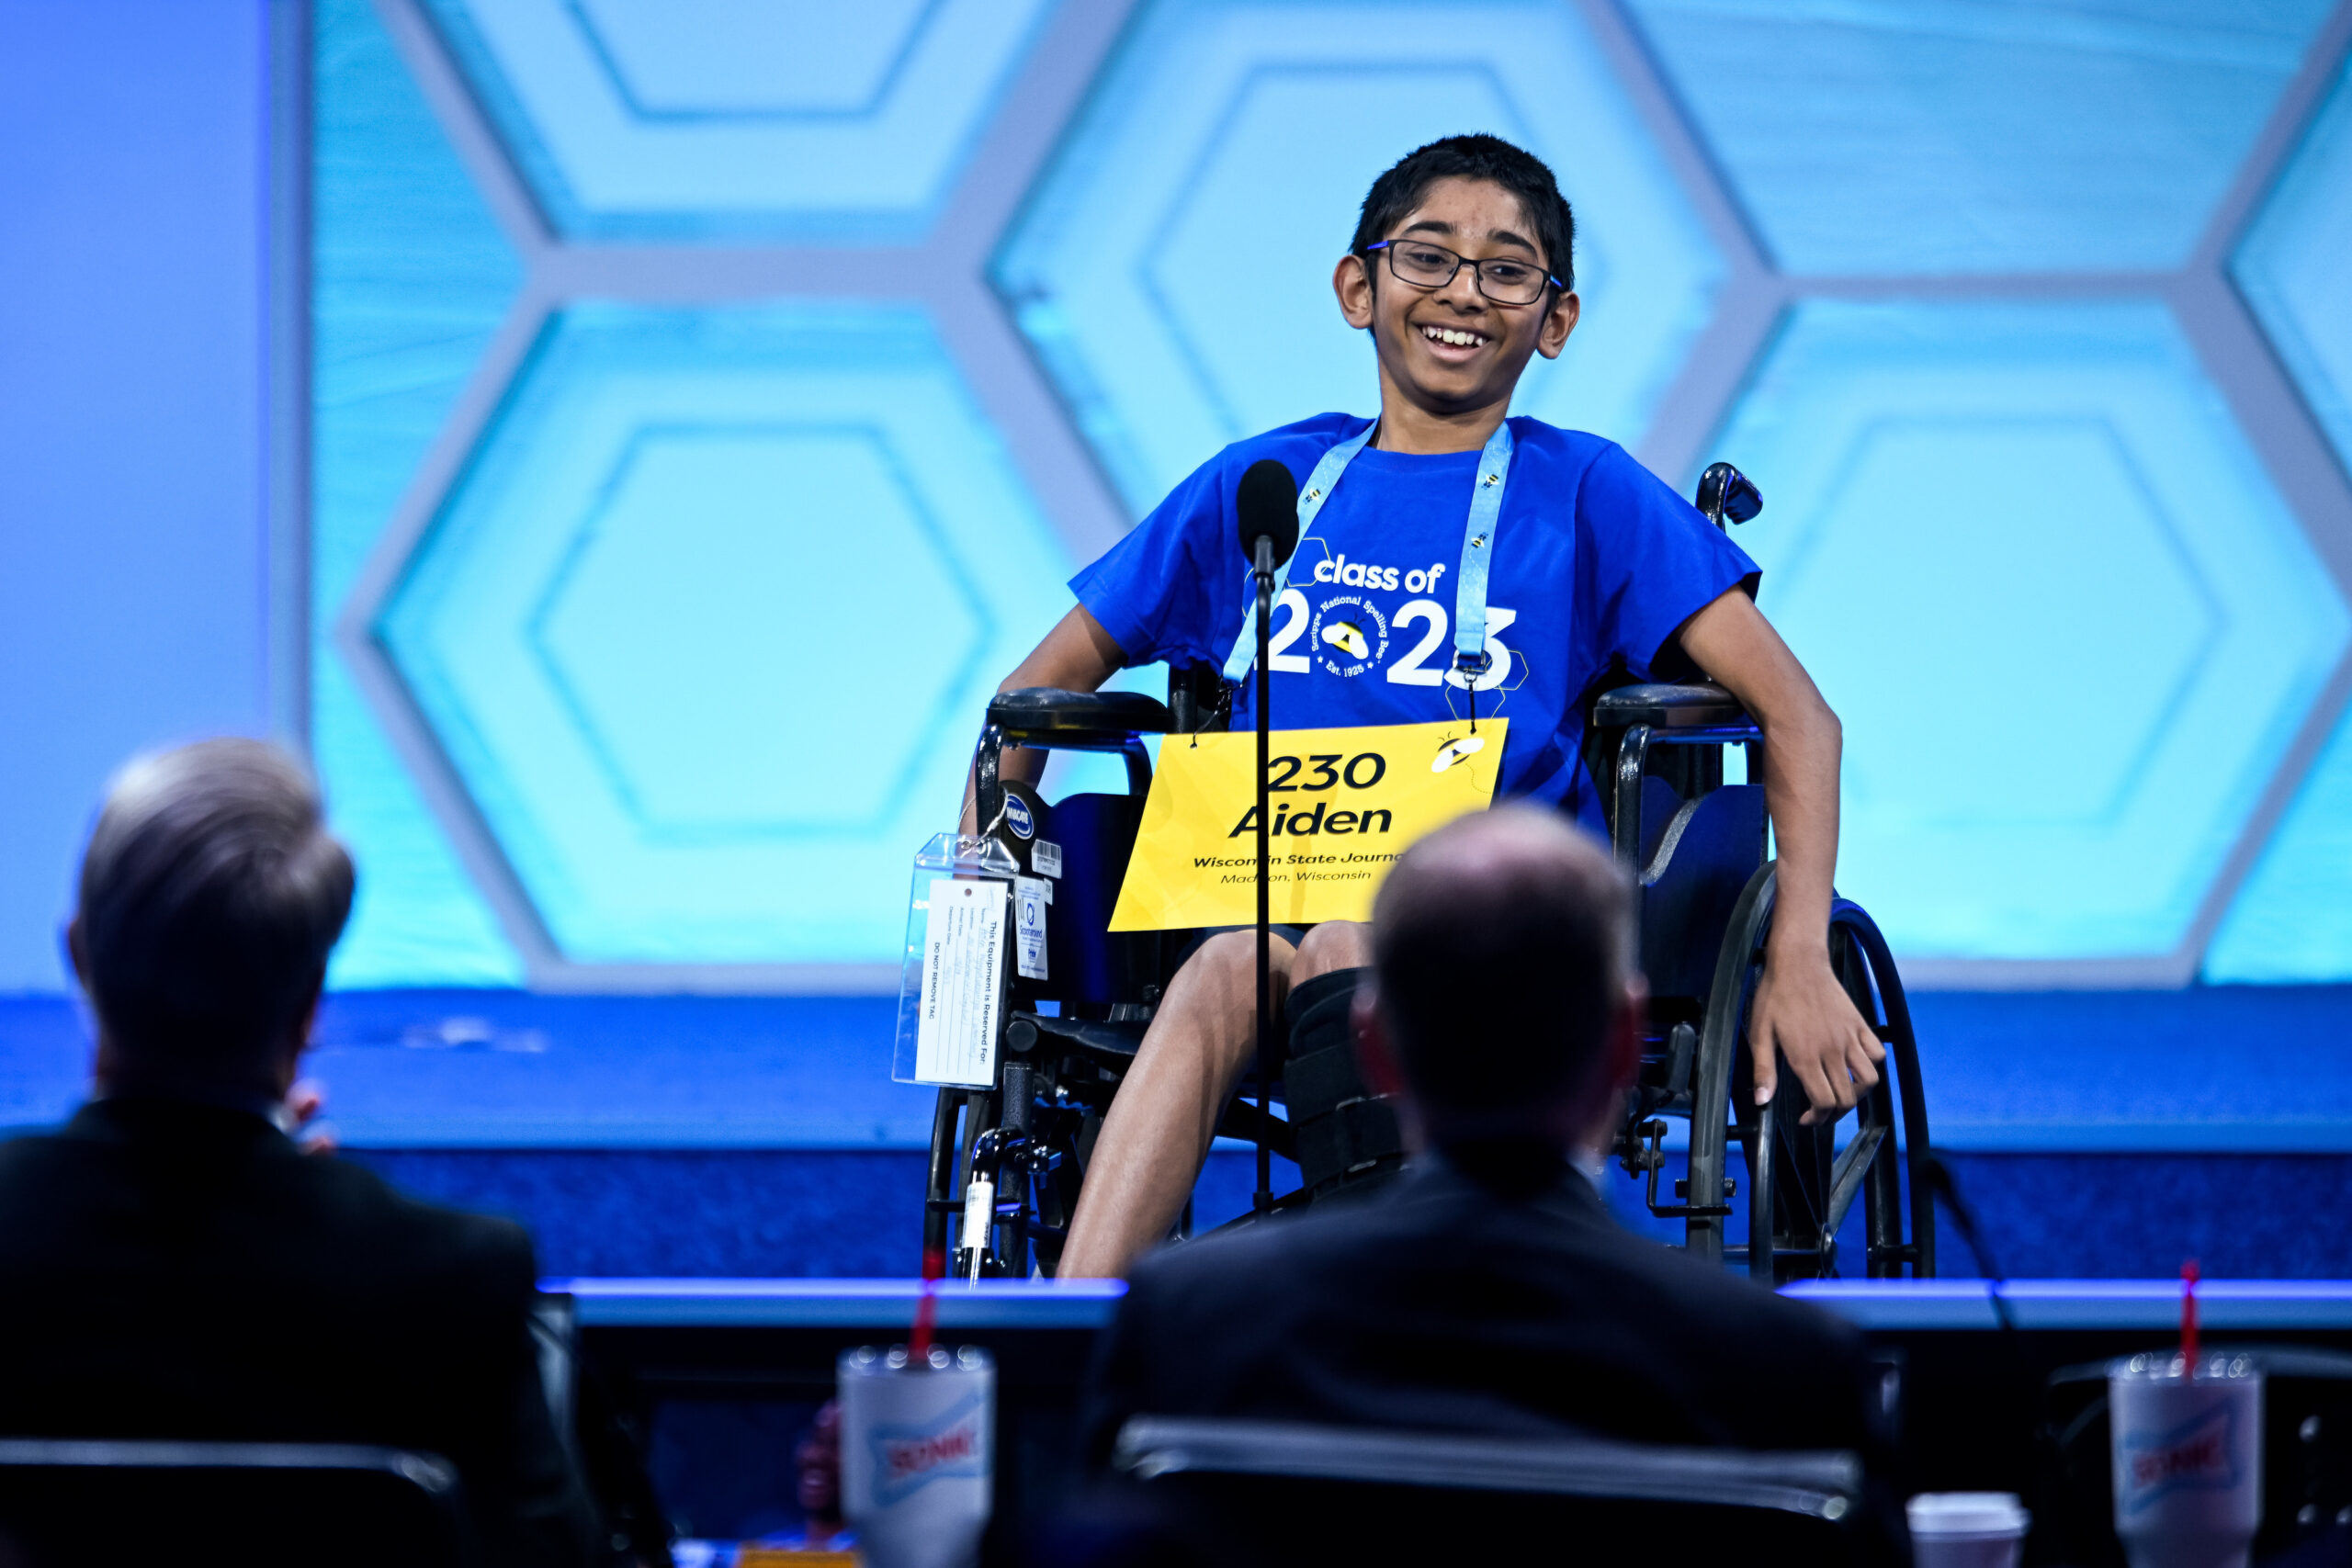 a boy in a wheelchair competes in a spelling bee